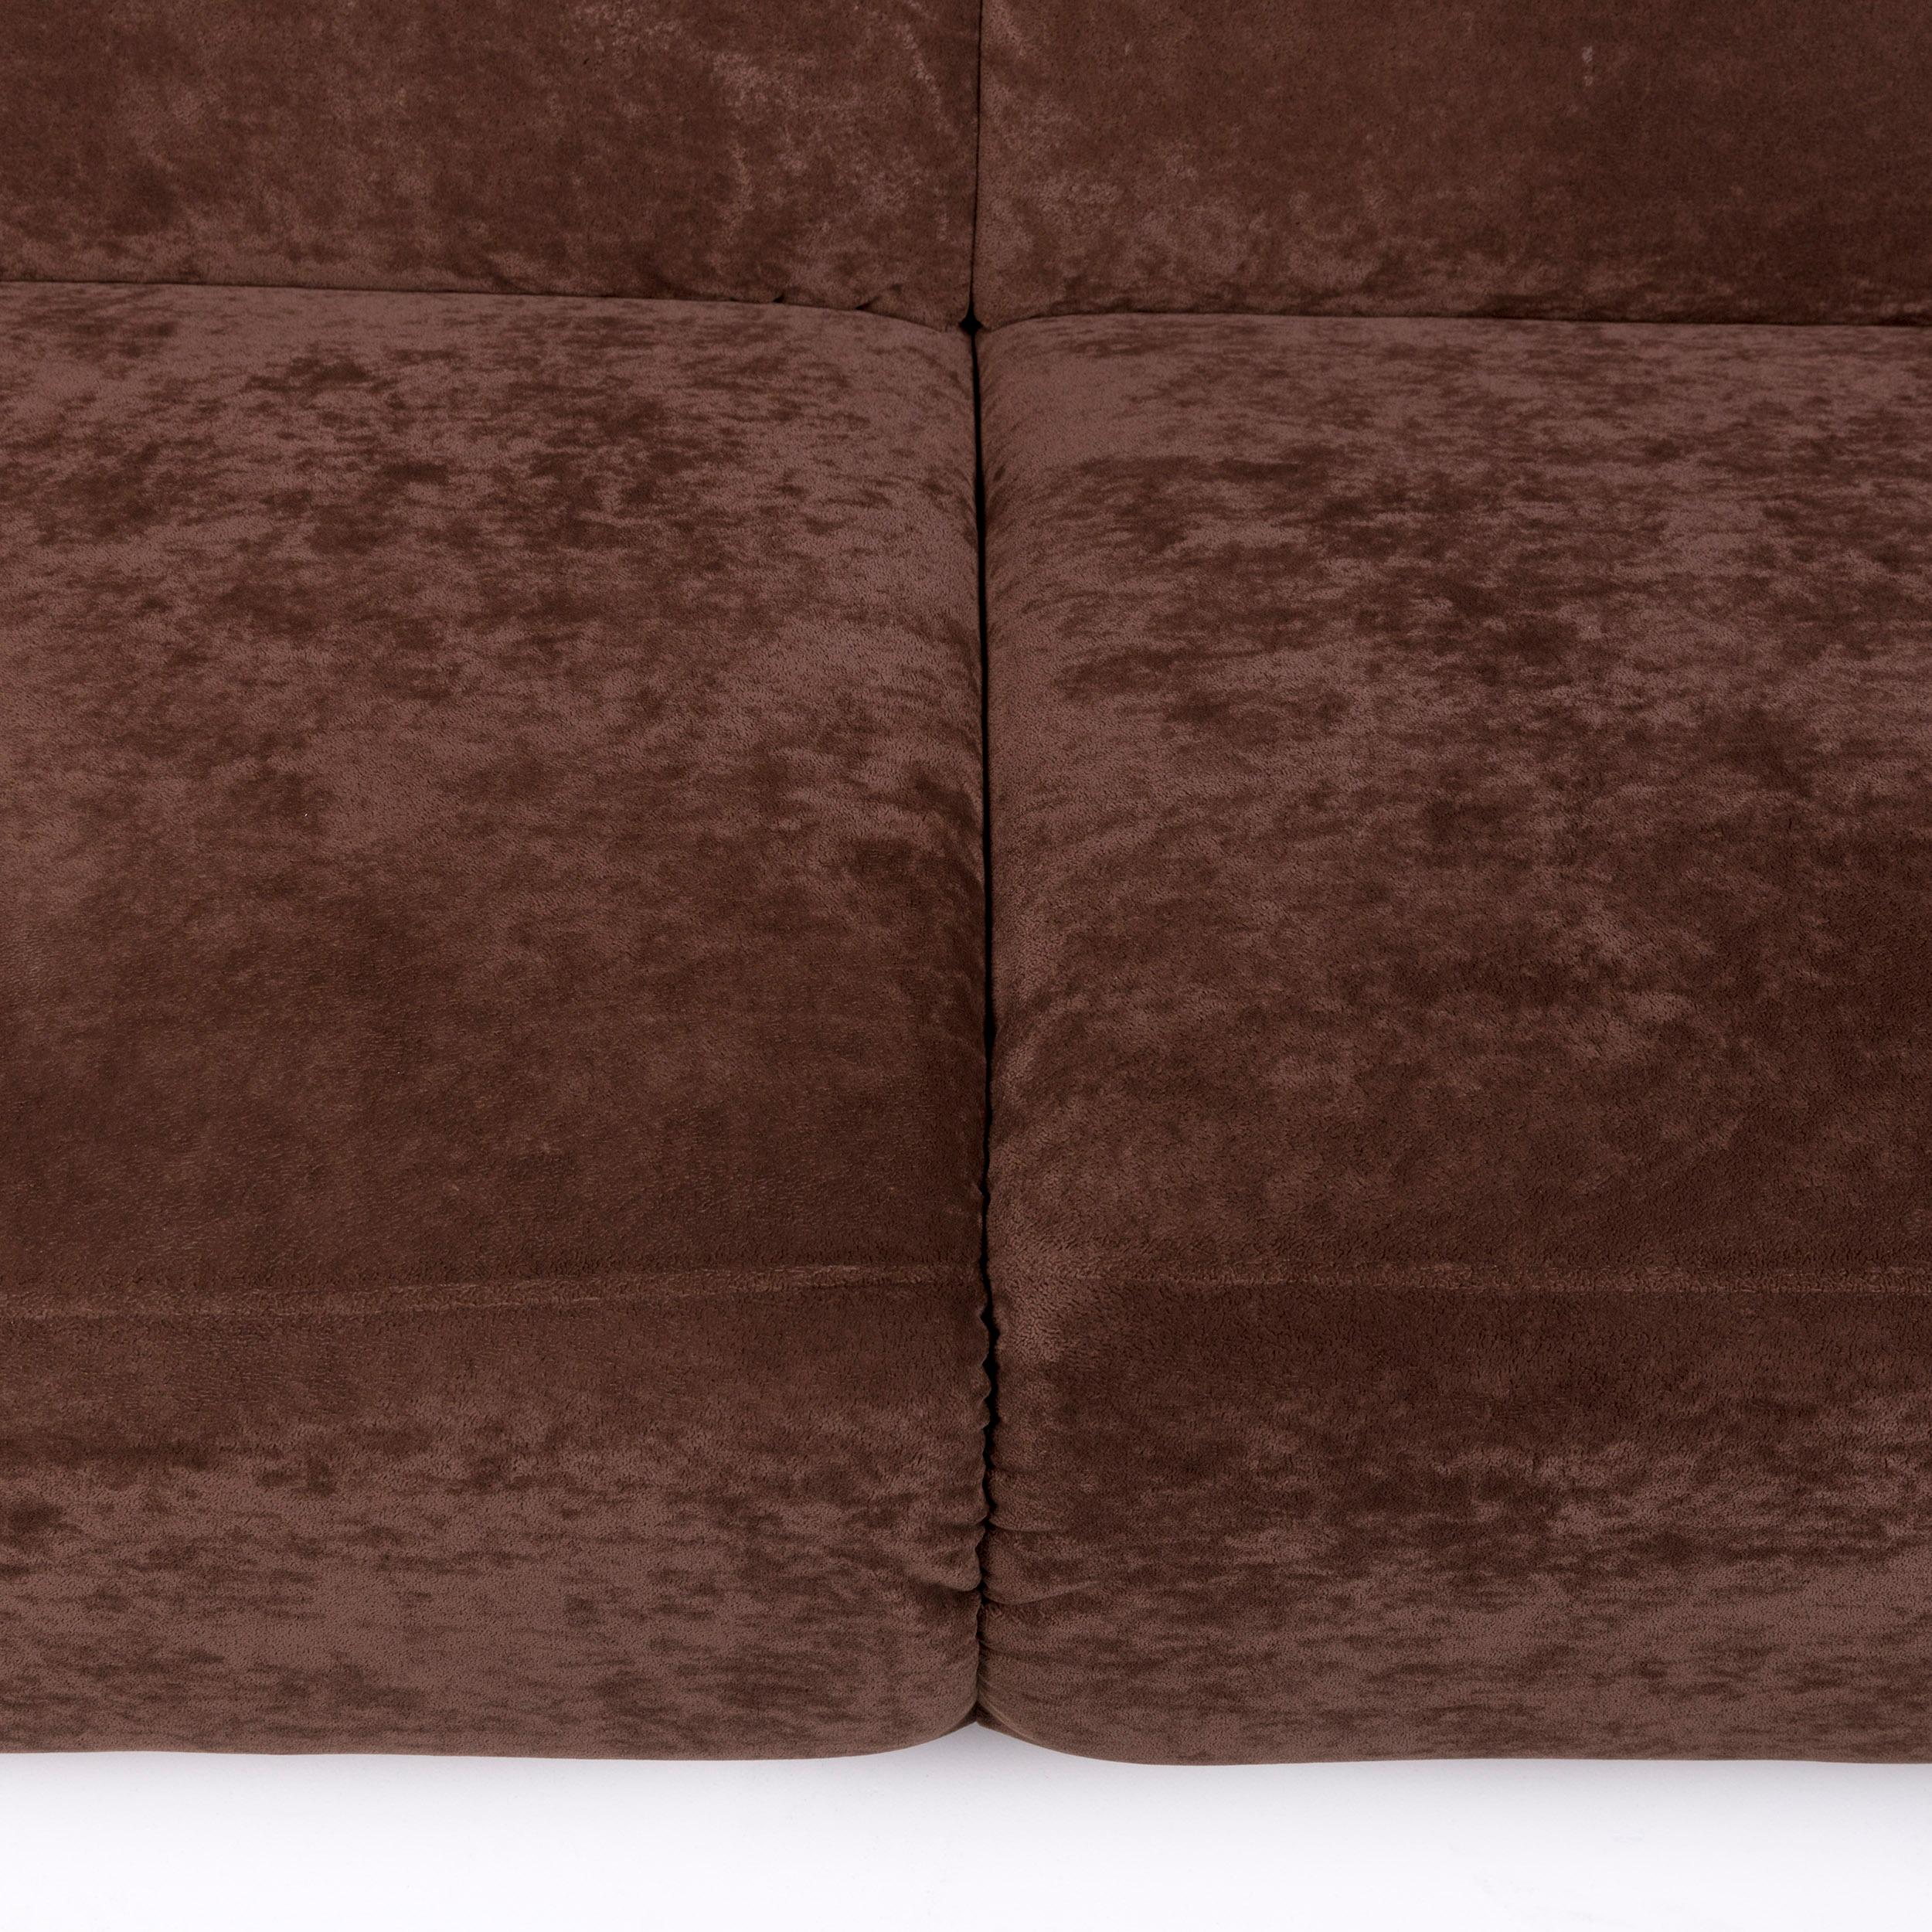 Polish Himolla Fabric Sofa Brown Two-Seat Couch For Sale